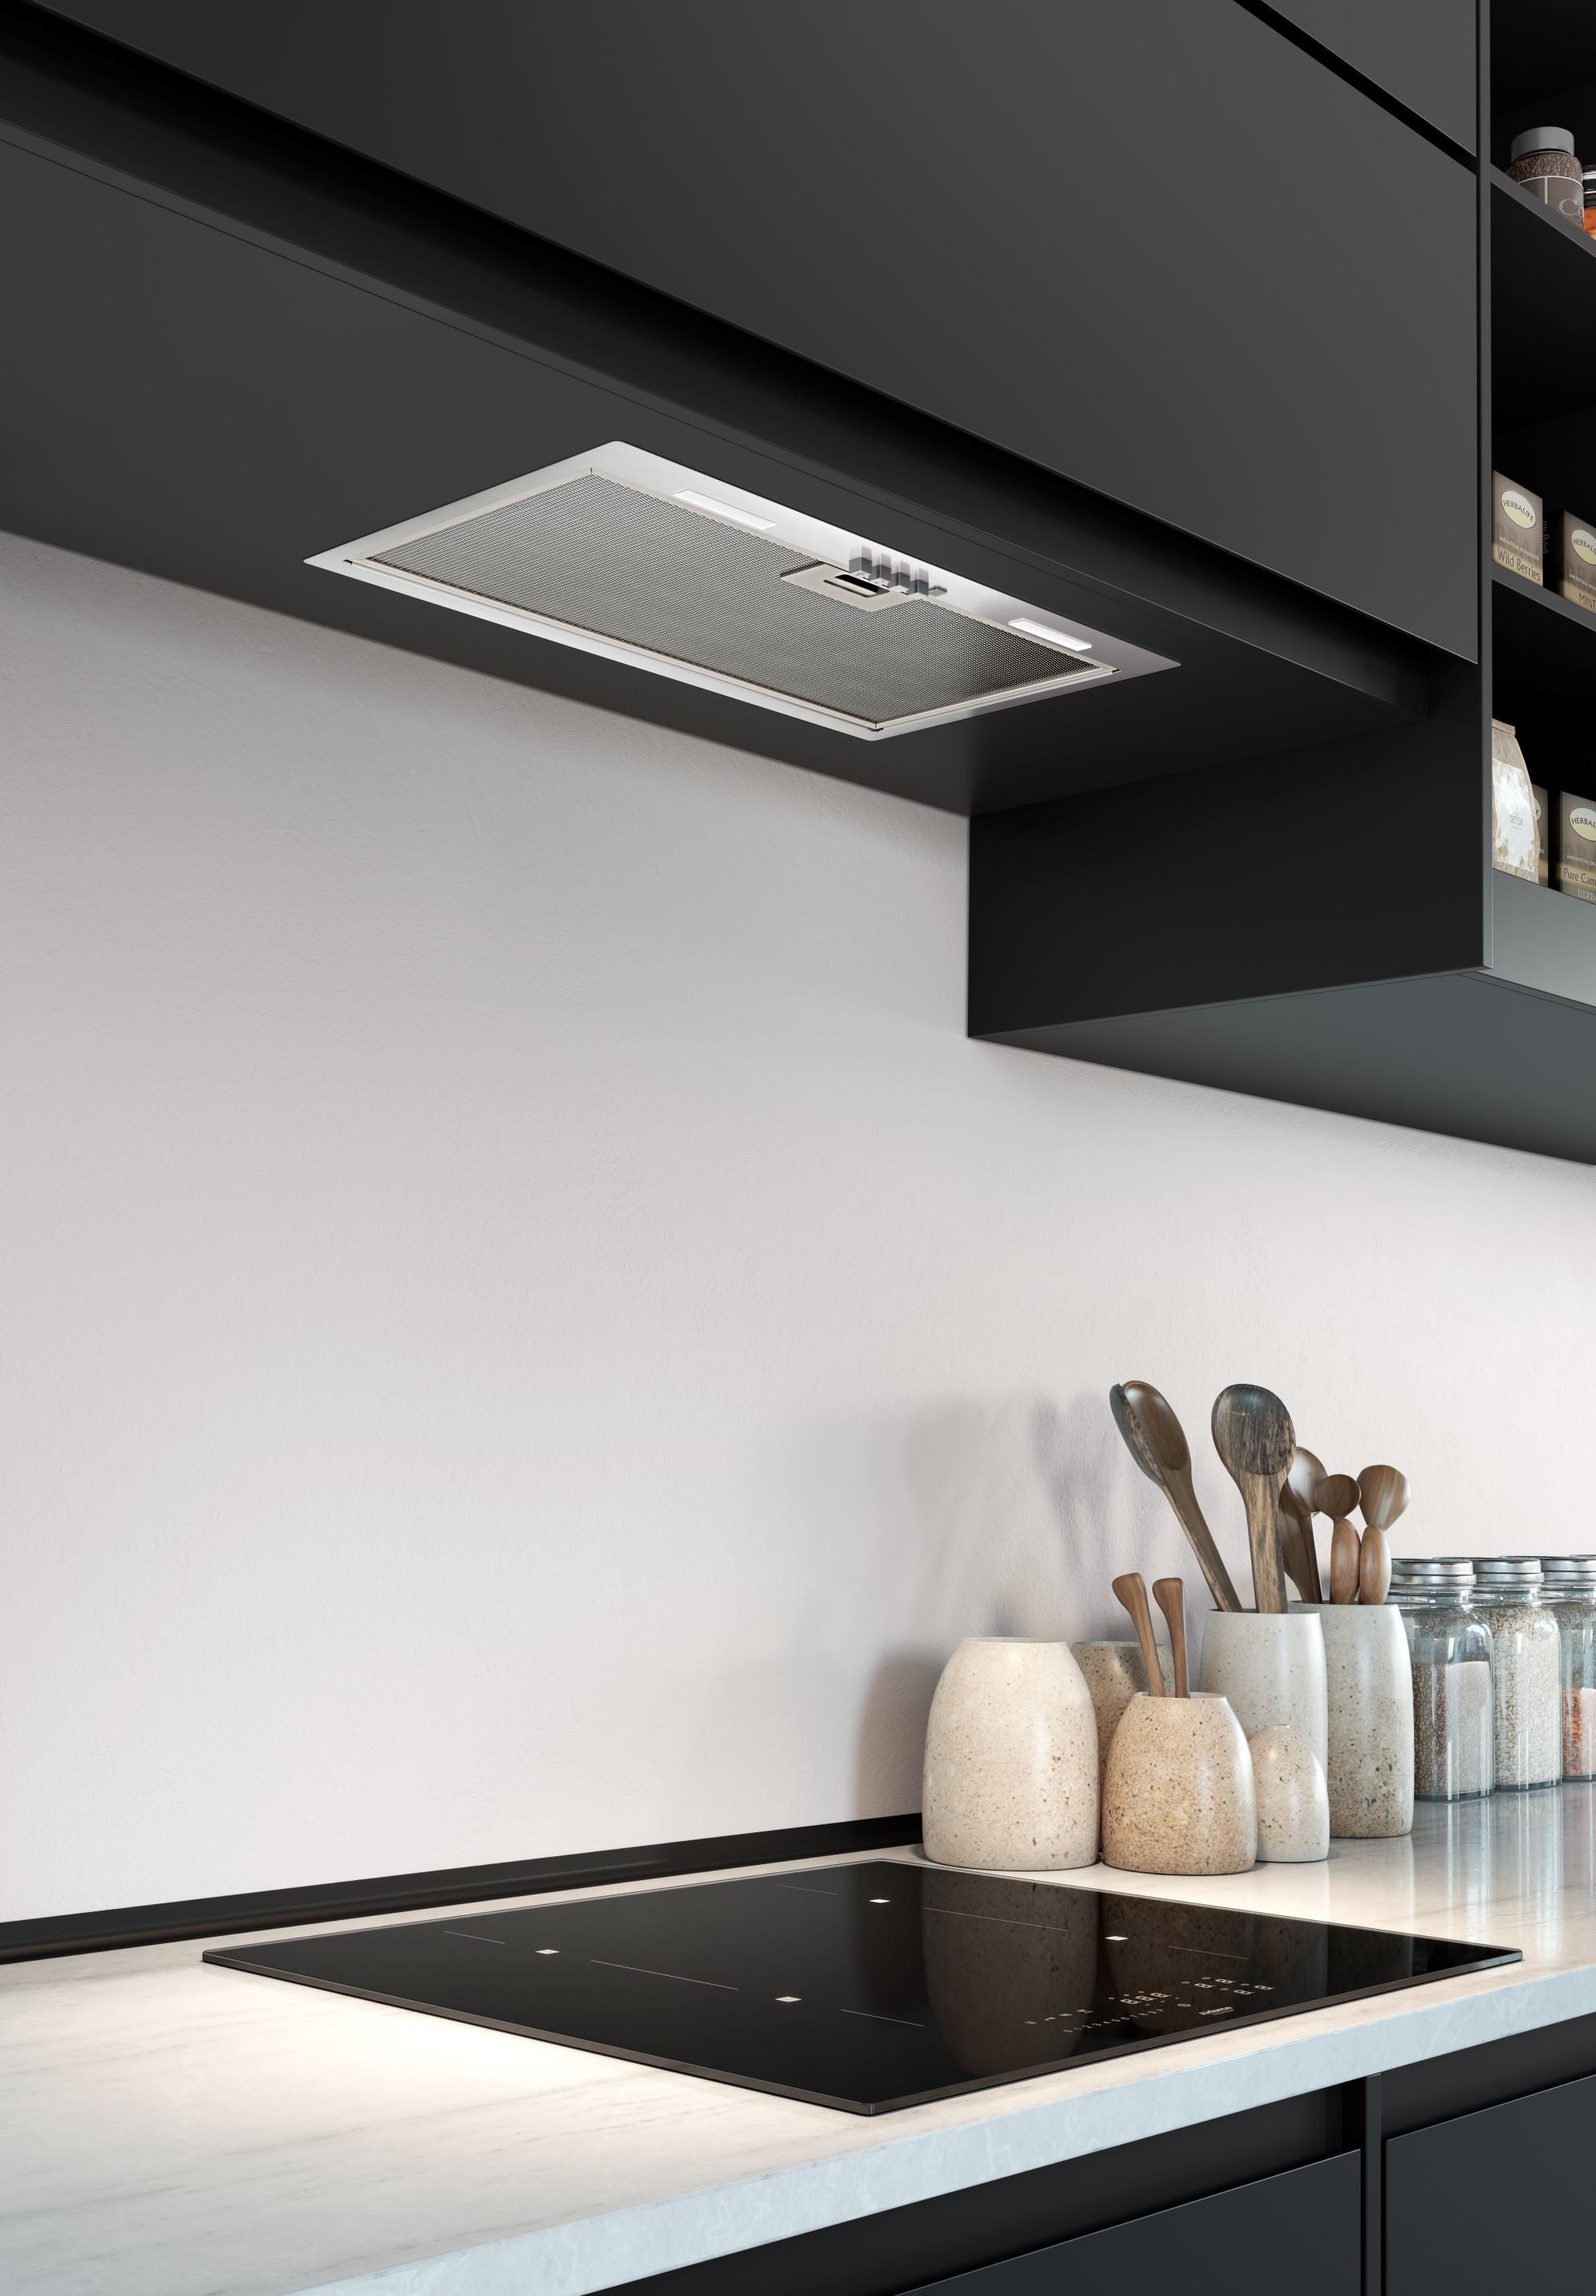 Airforce Modulo POP 52cm Built-In Cooker Hood 3 Speed Push Buttons- Stainless Steel Finish